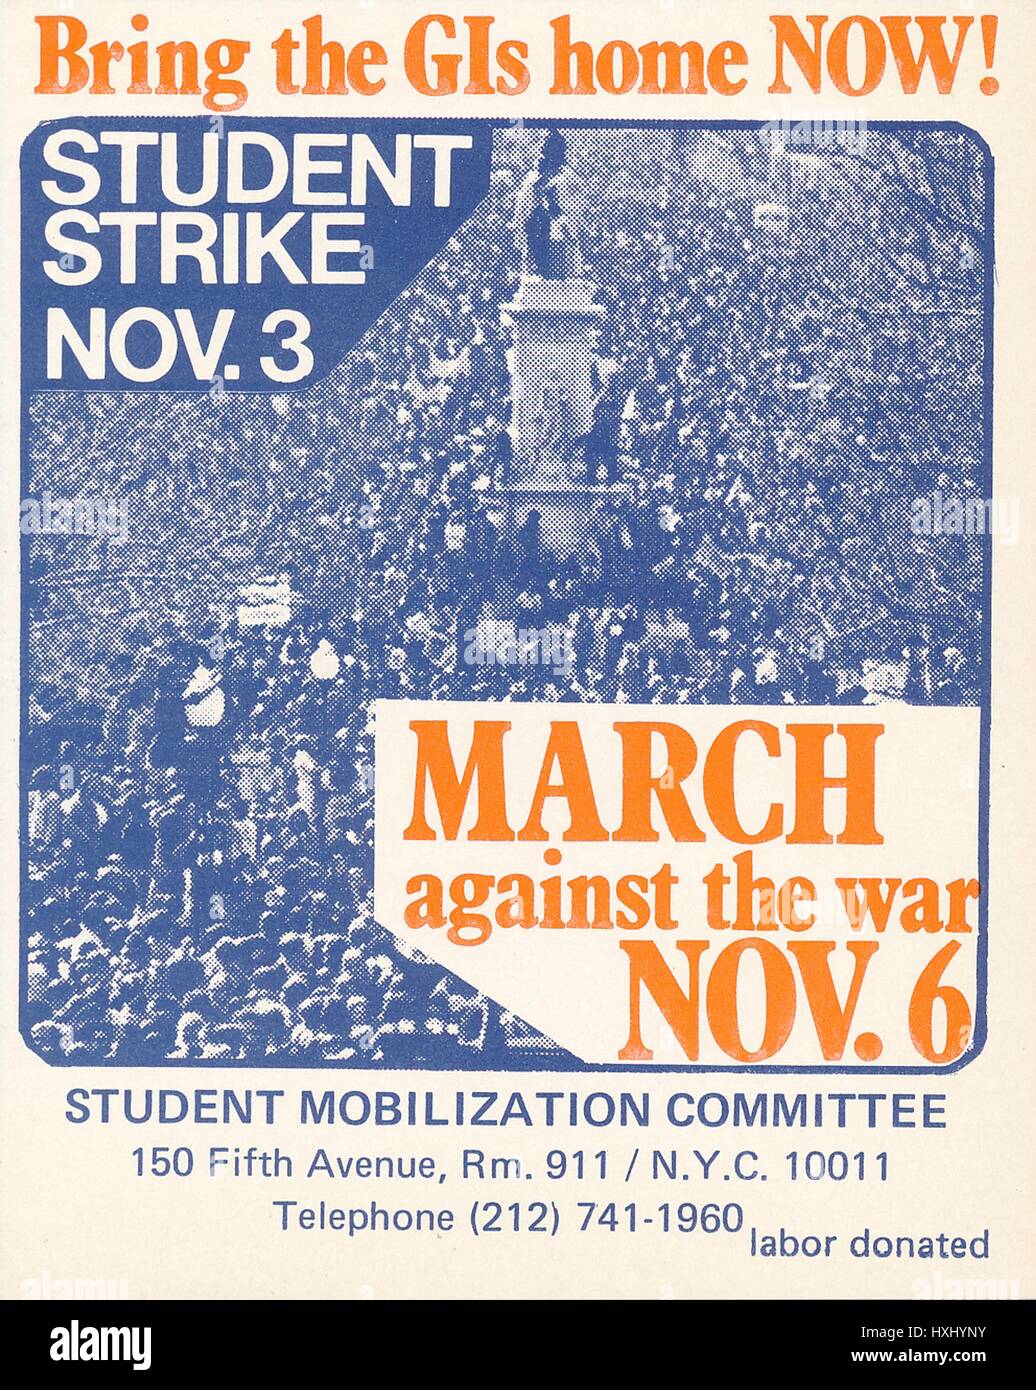 A Vietnam War era leaflet from the Student Mobilization Committee titled 'Bring the GIs home NOW!' advocating a student strike and a march, 1969. Stock Photo